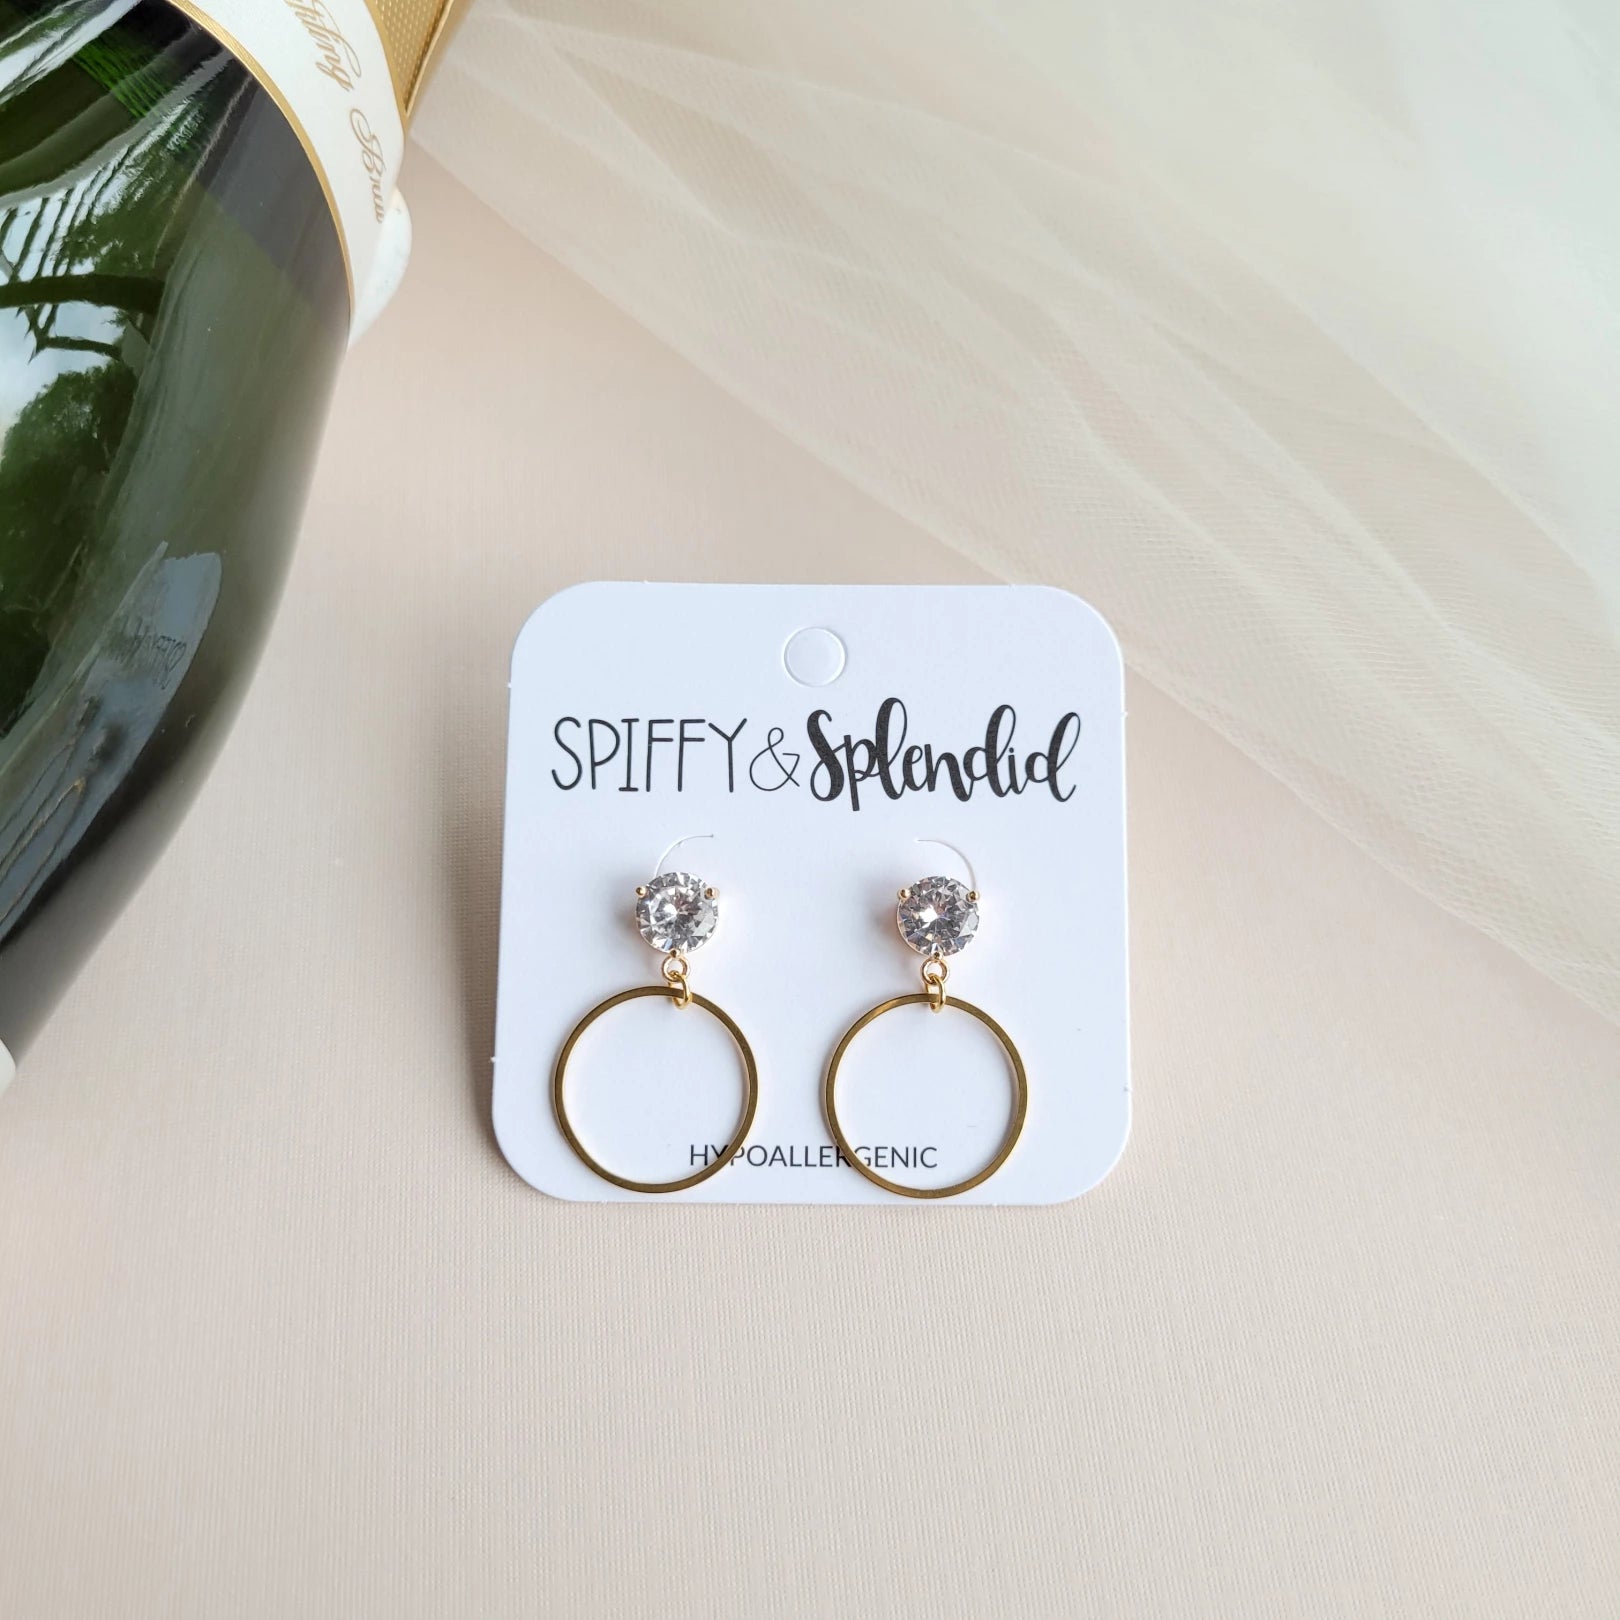 Our I Do Earrings are the cutest little earrings that look exactly like an engagement ring! These are perfect for engagement parties and beyond. Plus, bride or not, these earrings are perfect for wedding guests or just to add a formal touch to any look.  Zircon stud posts on gold-plated brass 18k gold-plated stainless steel dainty loops